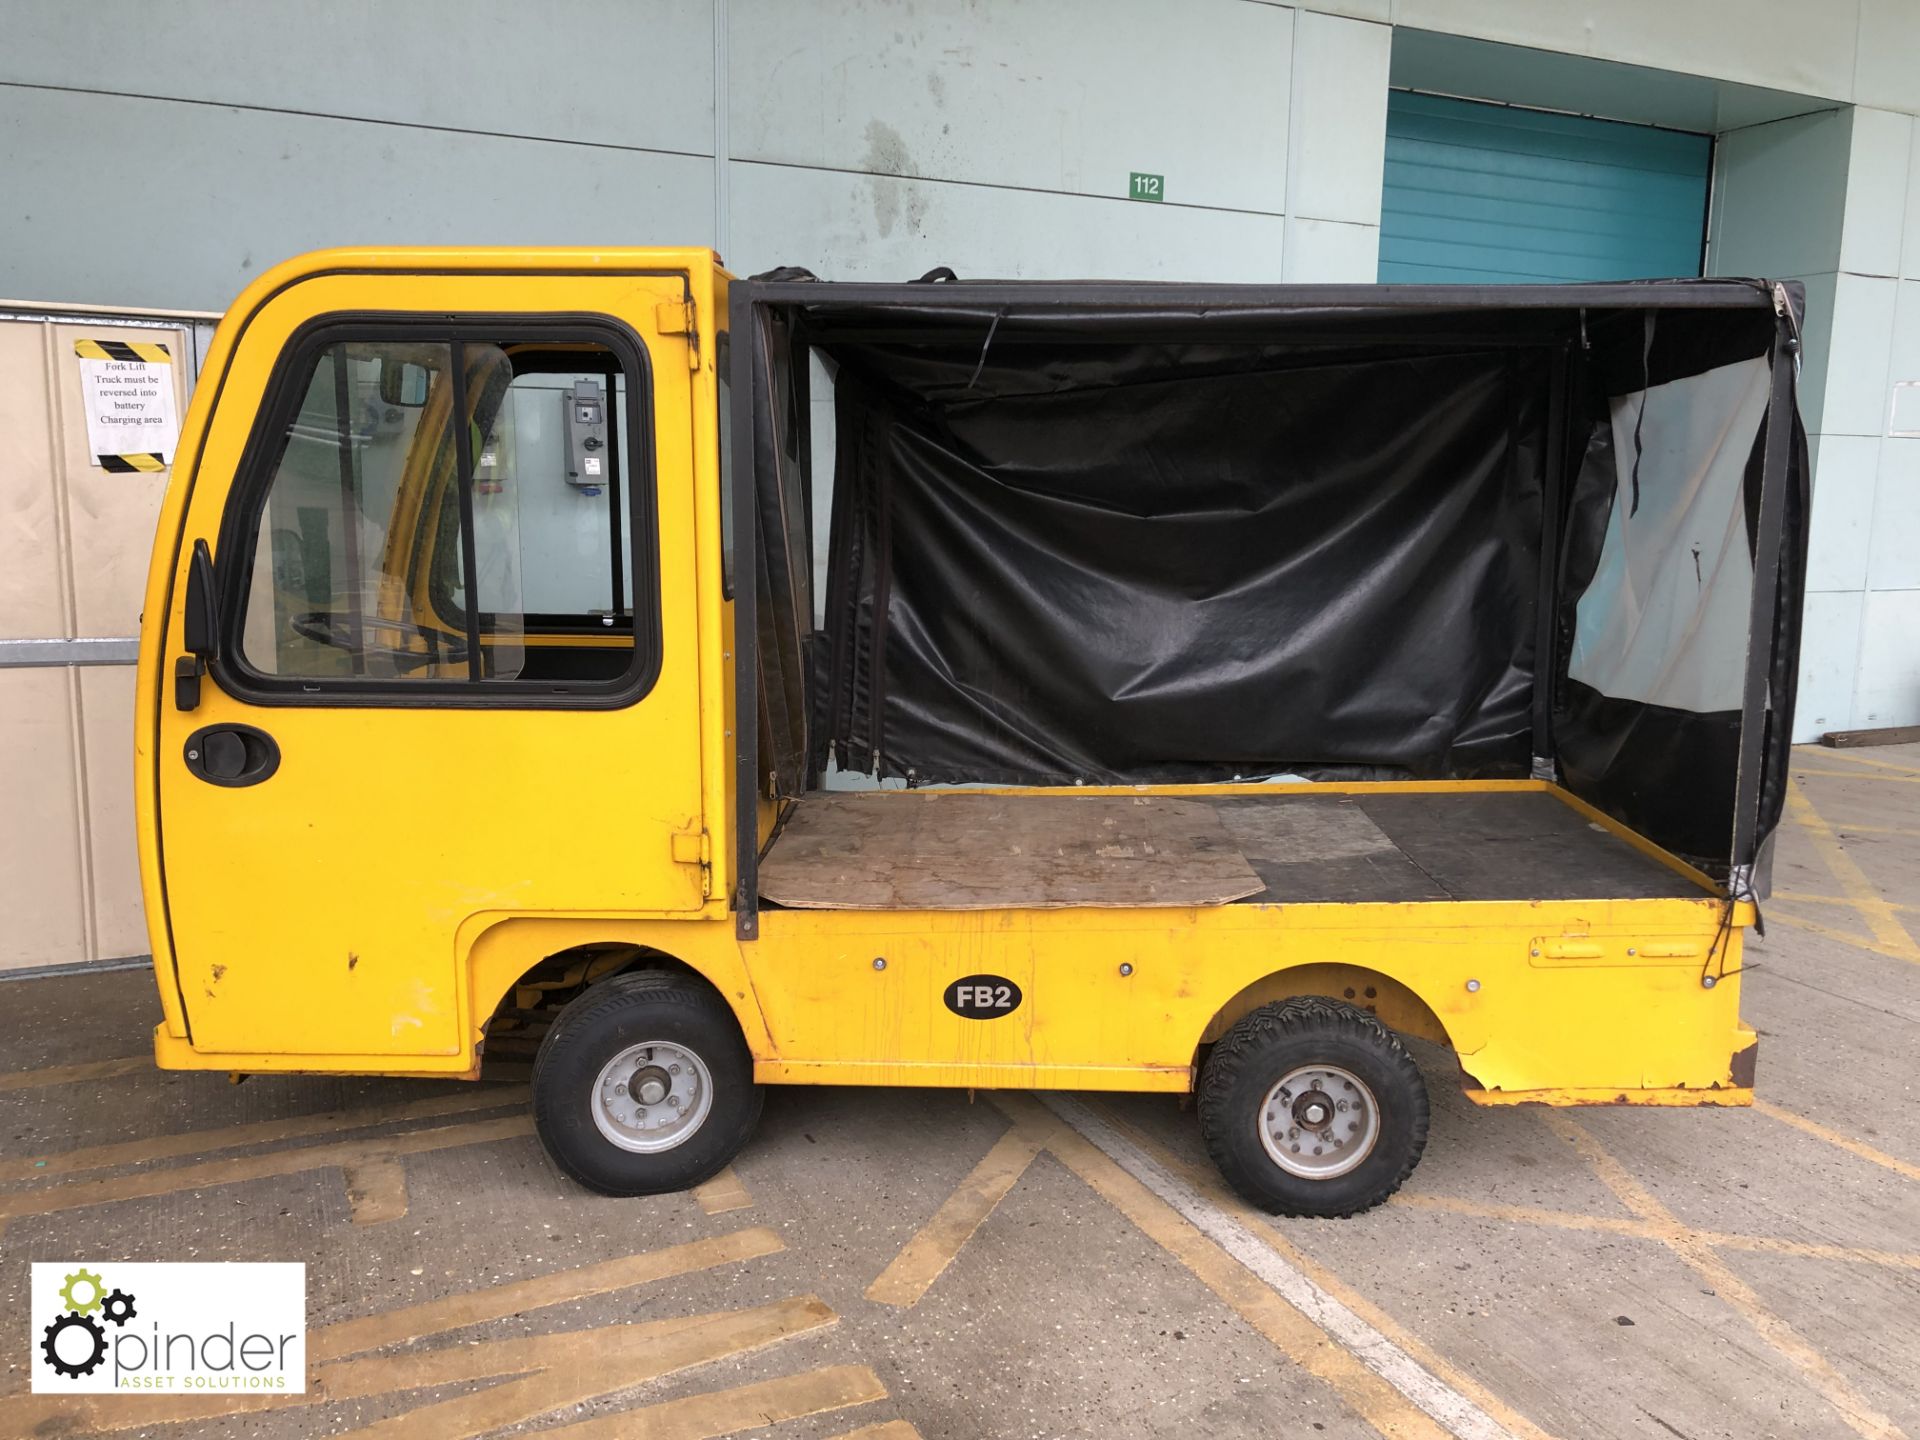 Bradshaw Electric FB2 Electric Flatbed Truck, rated capacity 1362kg, year 2004, serial number 160850 - Image 3 of 8